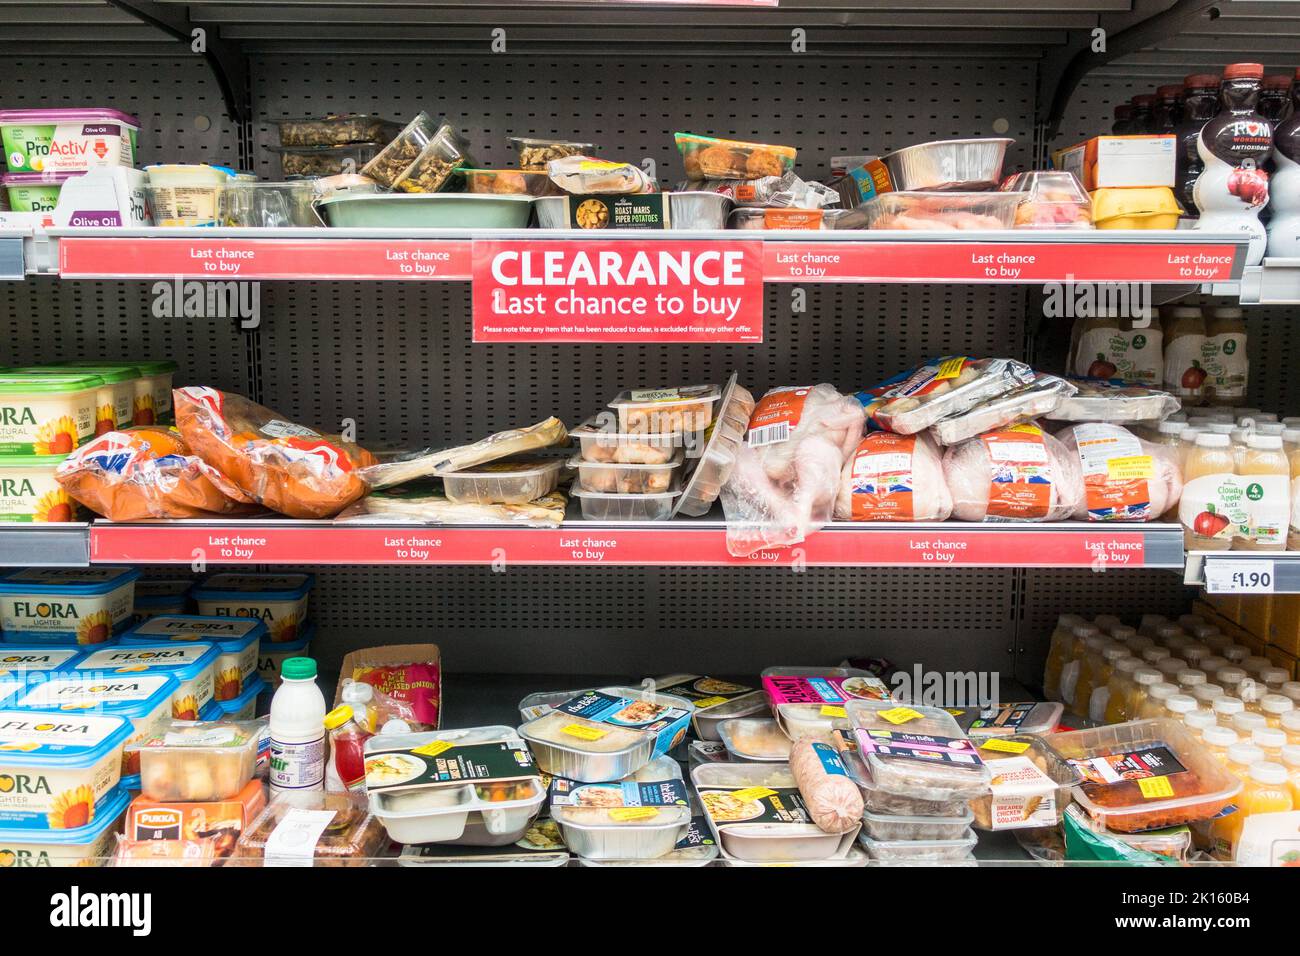 Clearance food shelf with last chance to buy Stock Photo